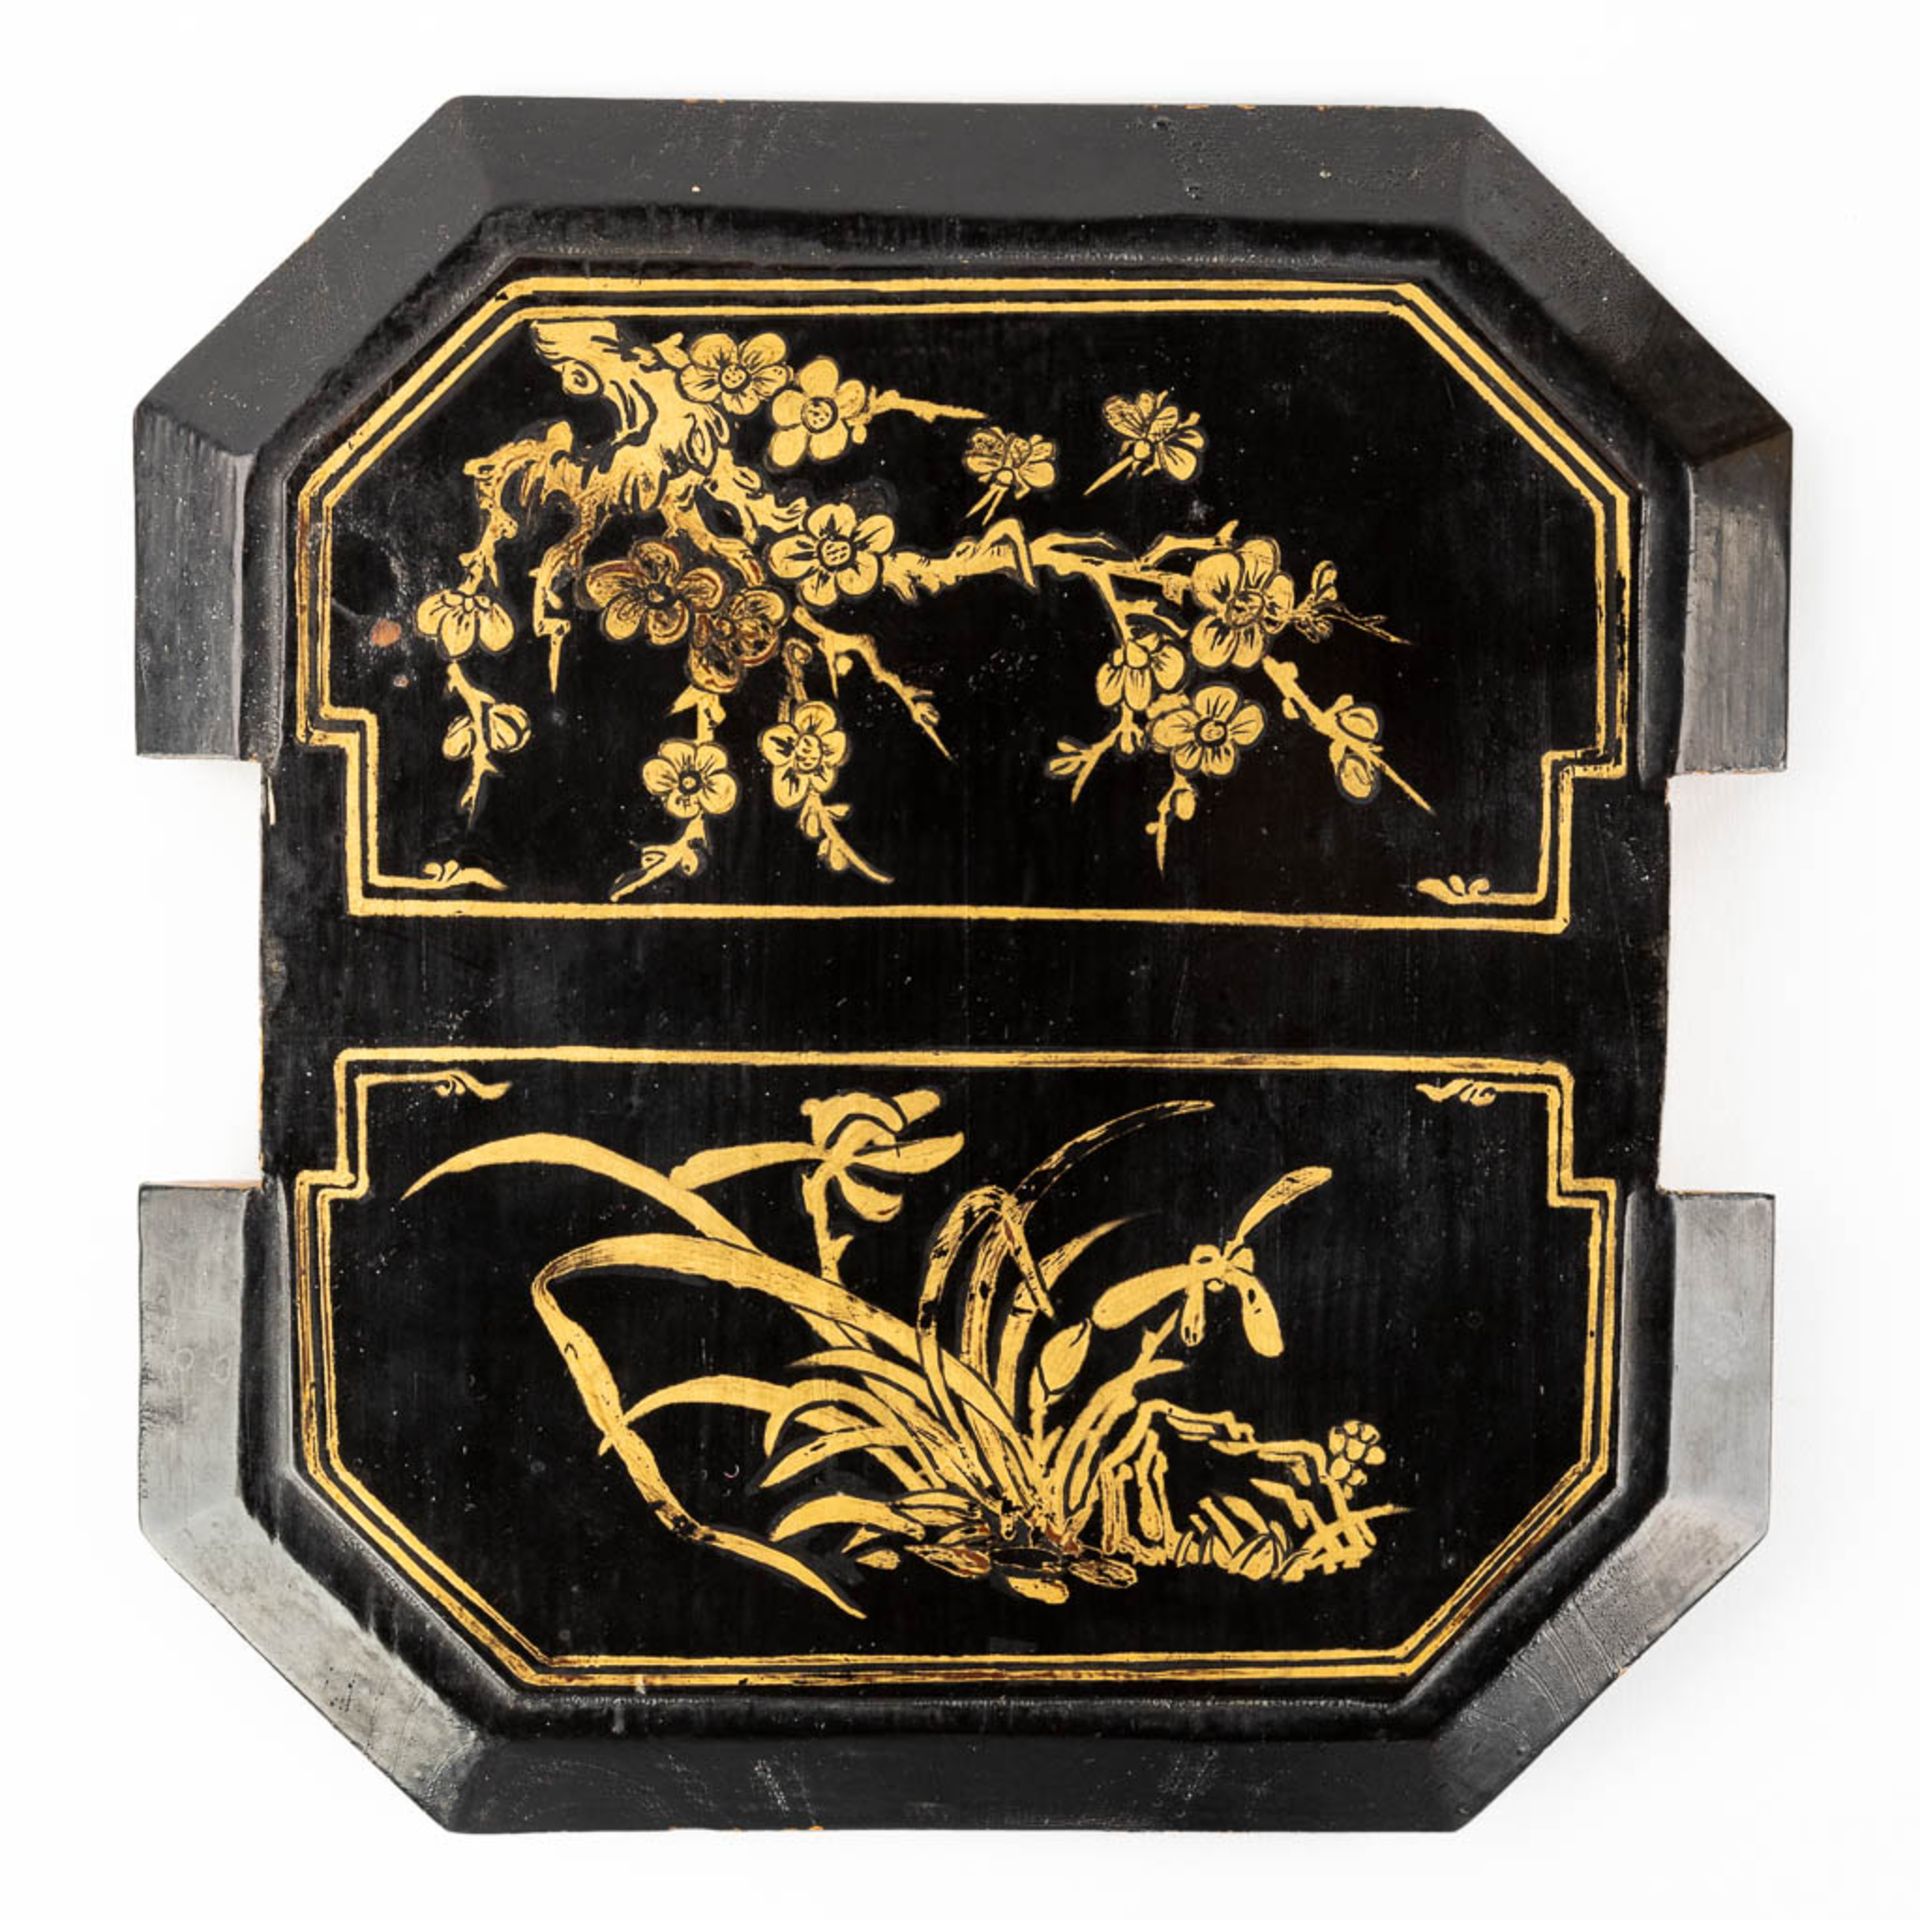 A Chinese carrying case for a teapot, gilt wood with lacquer and dragon figurines. 20th C. (D:24 x W - Image 15 of 16